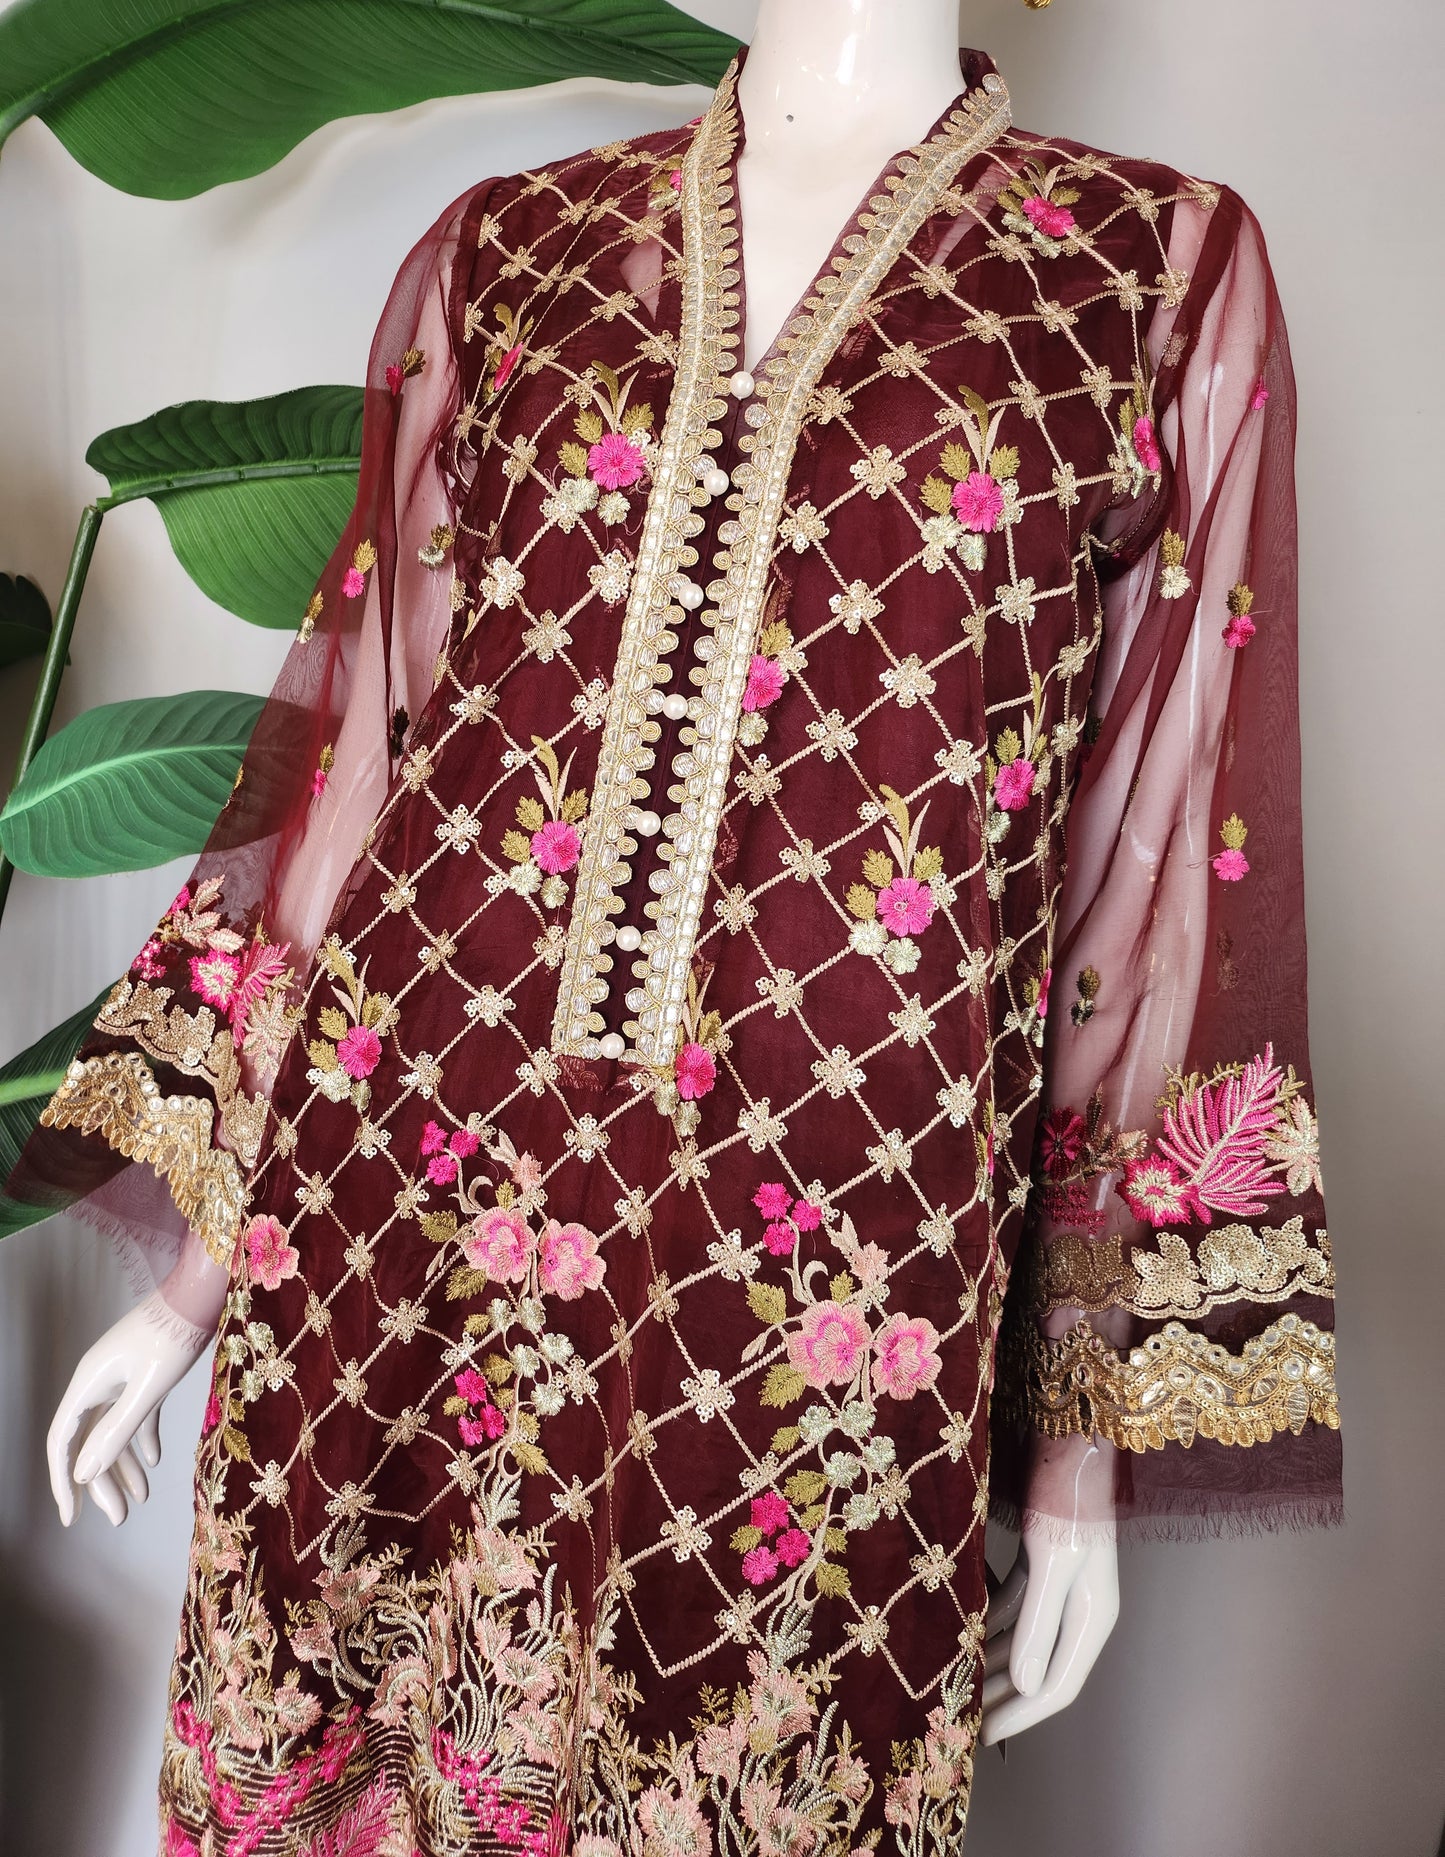 SADAF AHMAD - Maroon Organza Formal with pink flower embroidery and foil works top + pants +dupatta